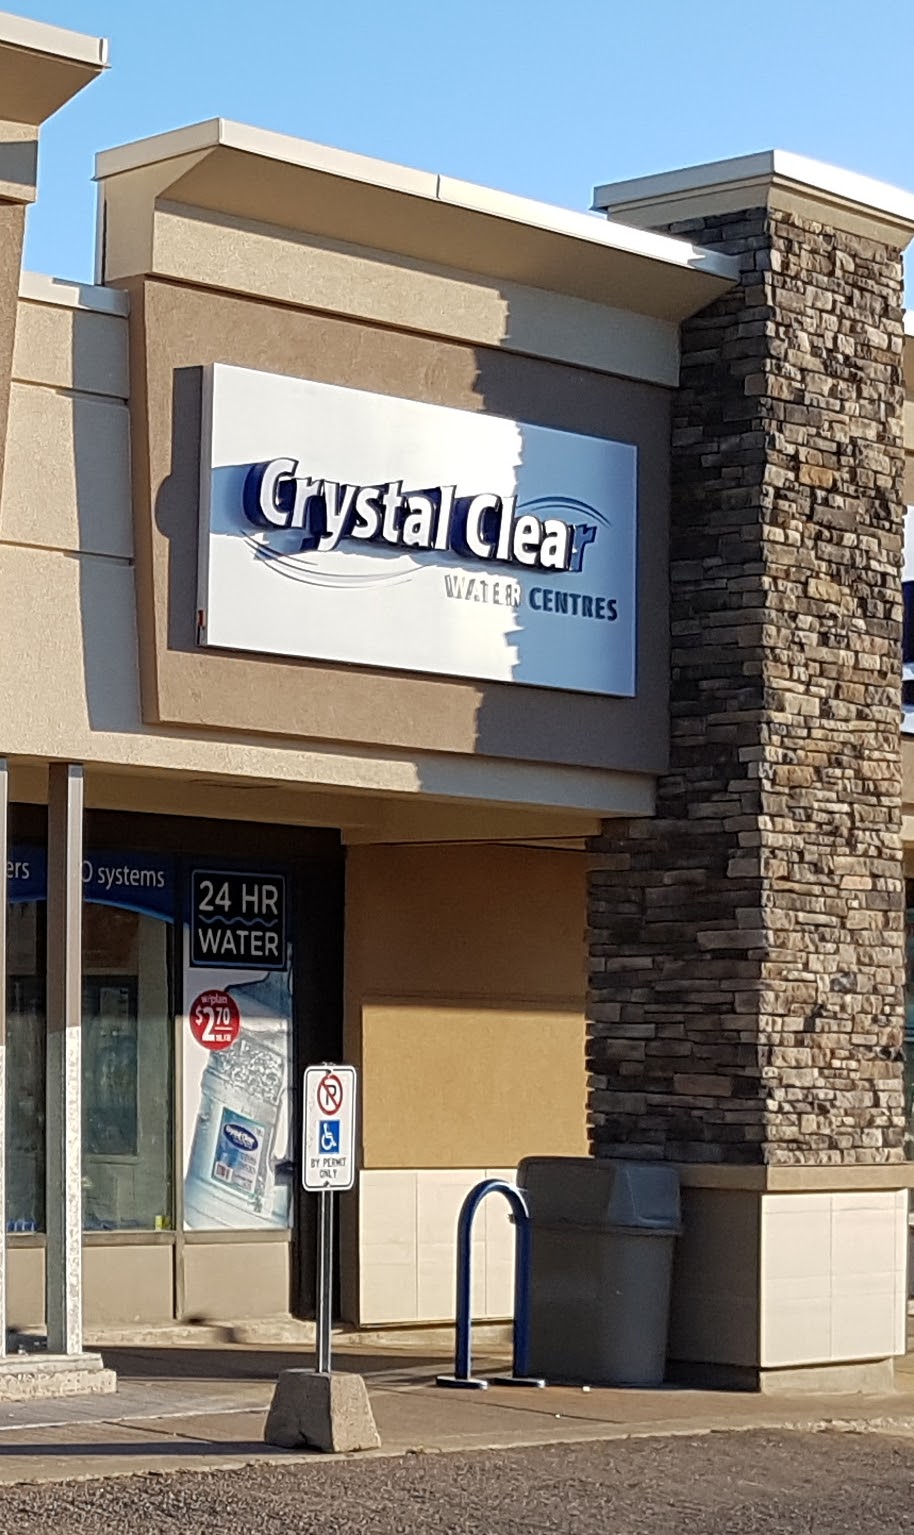 Crystal Clear Water Centres | store | 324 Highland Rd W, Kitchener, ON N2M 5G2, Canada | 5197452795 OR +1 519-745-2795